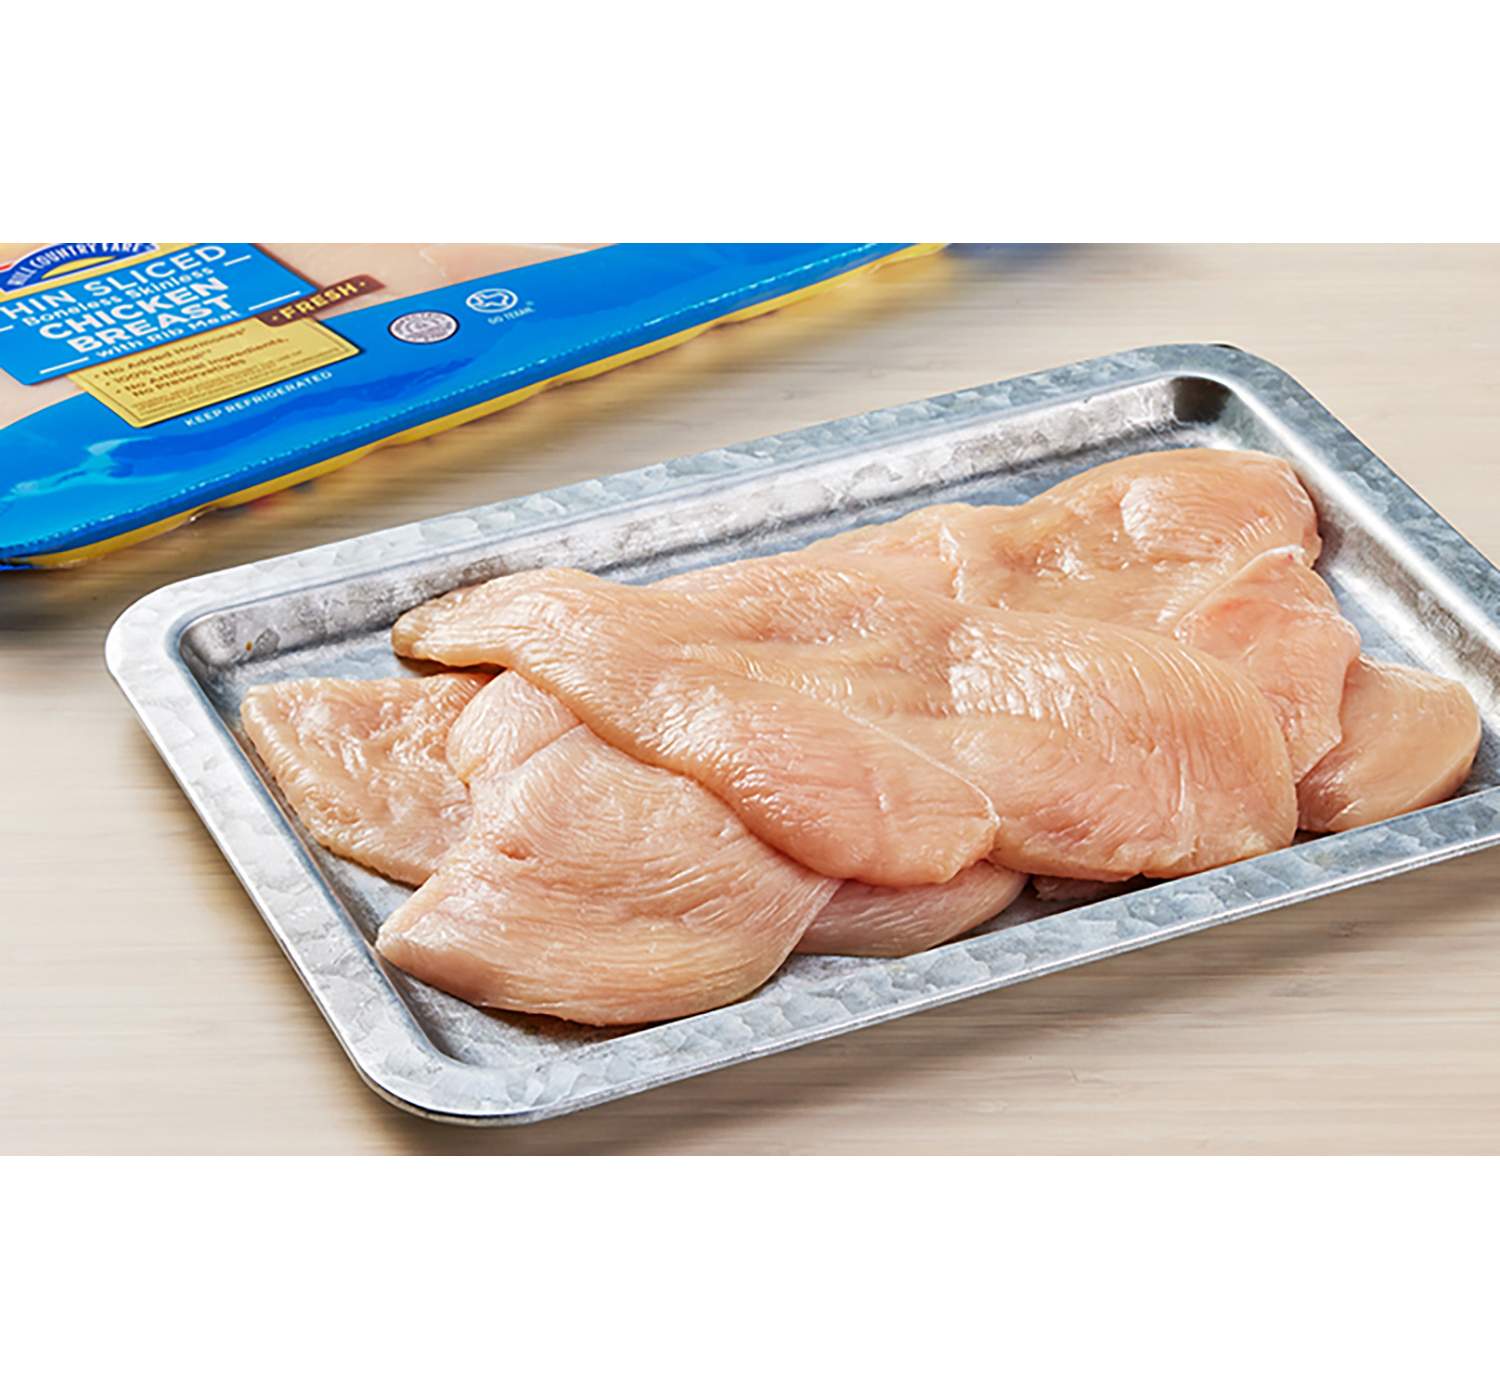 Hill Country Fare Boneless Skinless Thin Sliced Chicken Breast; image 4 of 4